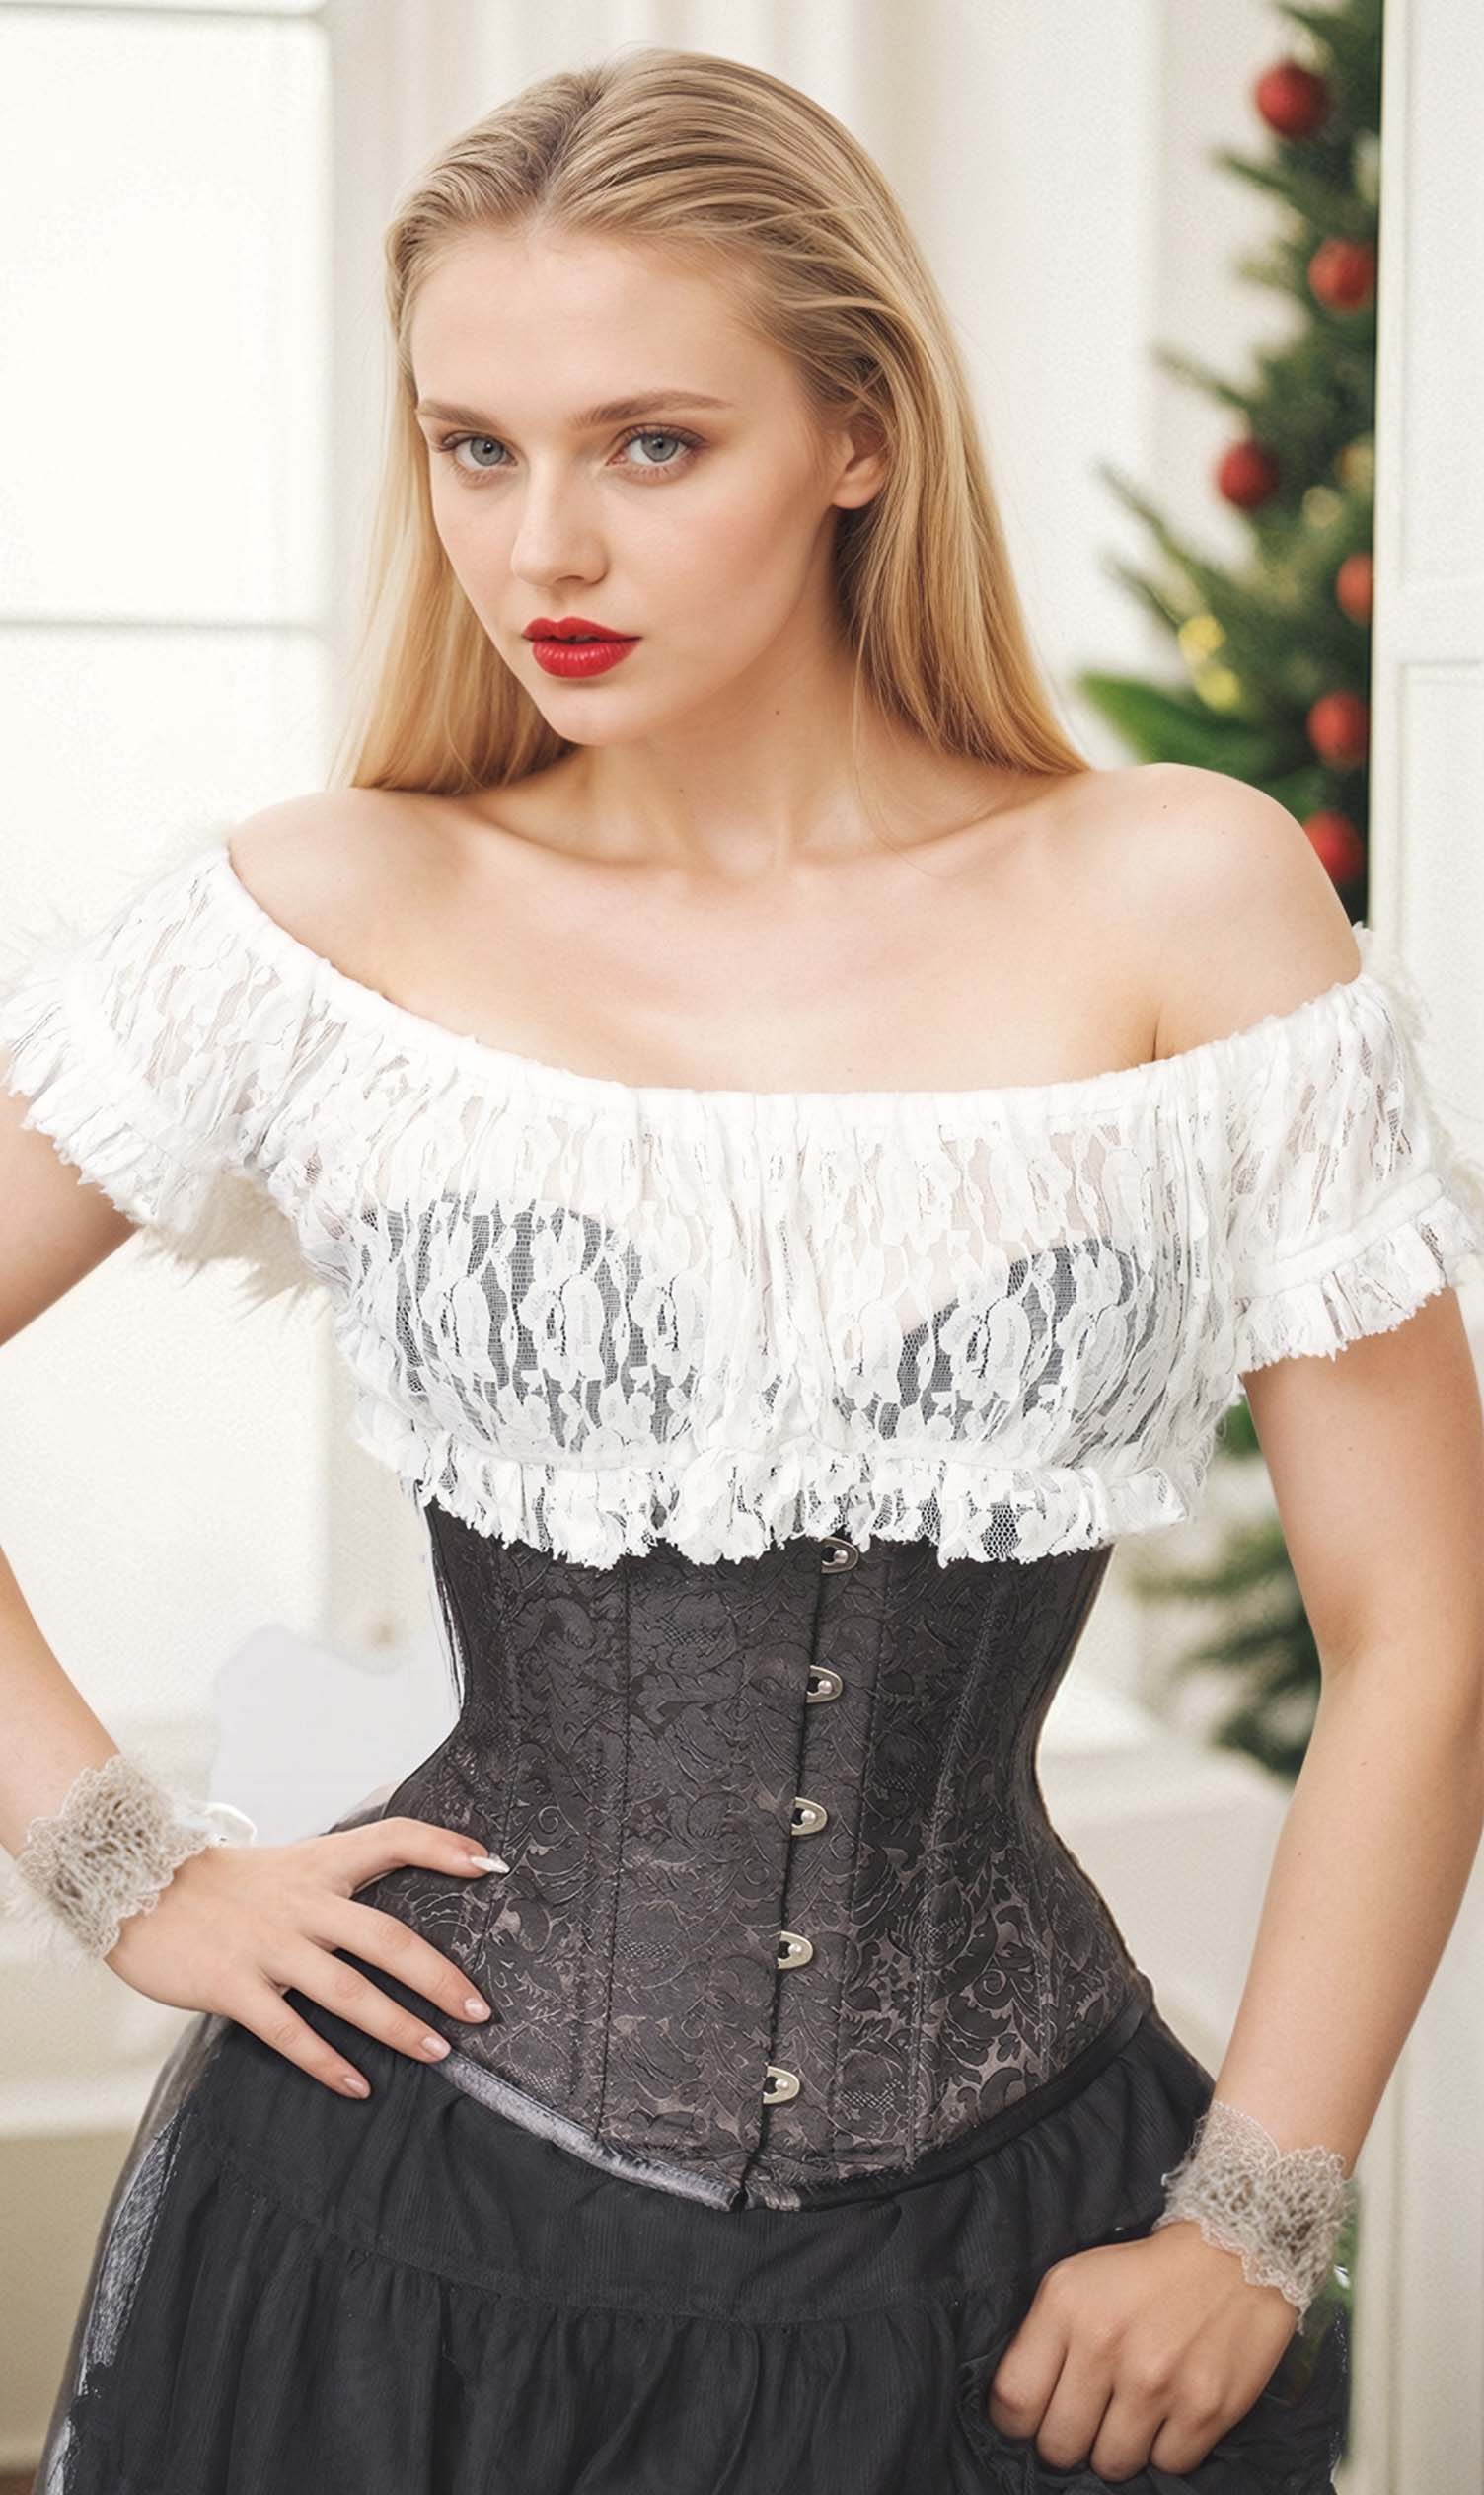 Steampunk Corsets: Our 5 Favorite Corsets for the Steampunk Look